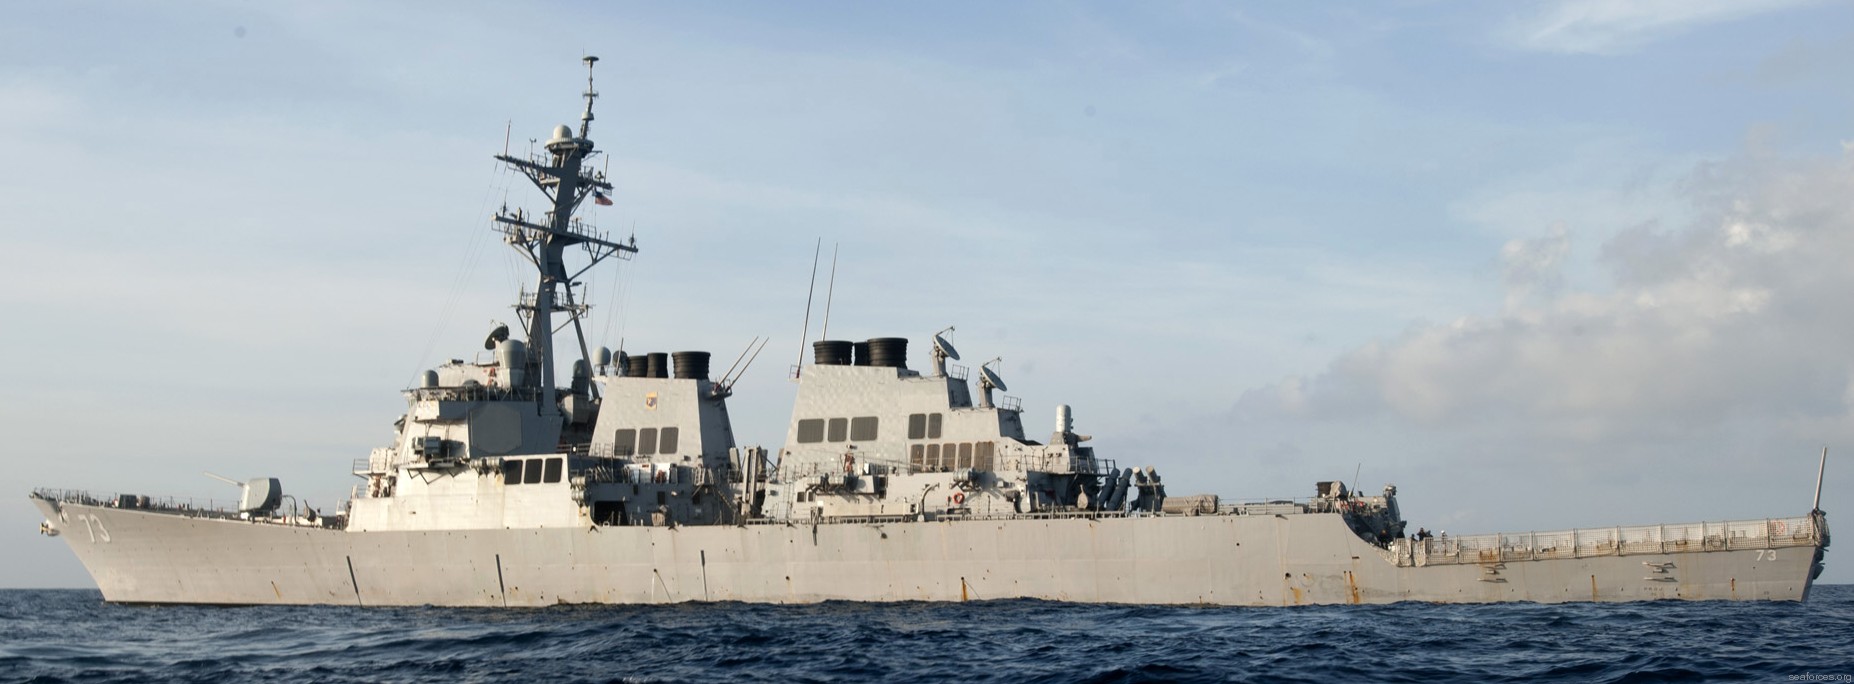 ddg-73 uss decatur guided missile destroyer arleigh burke class aegis bmd 23 bay of bengal